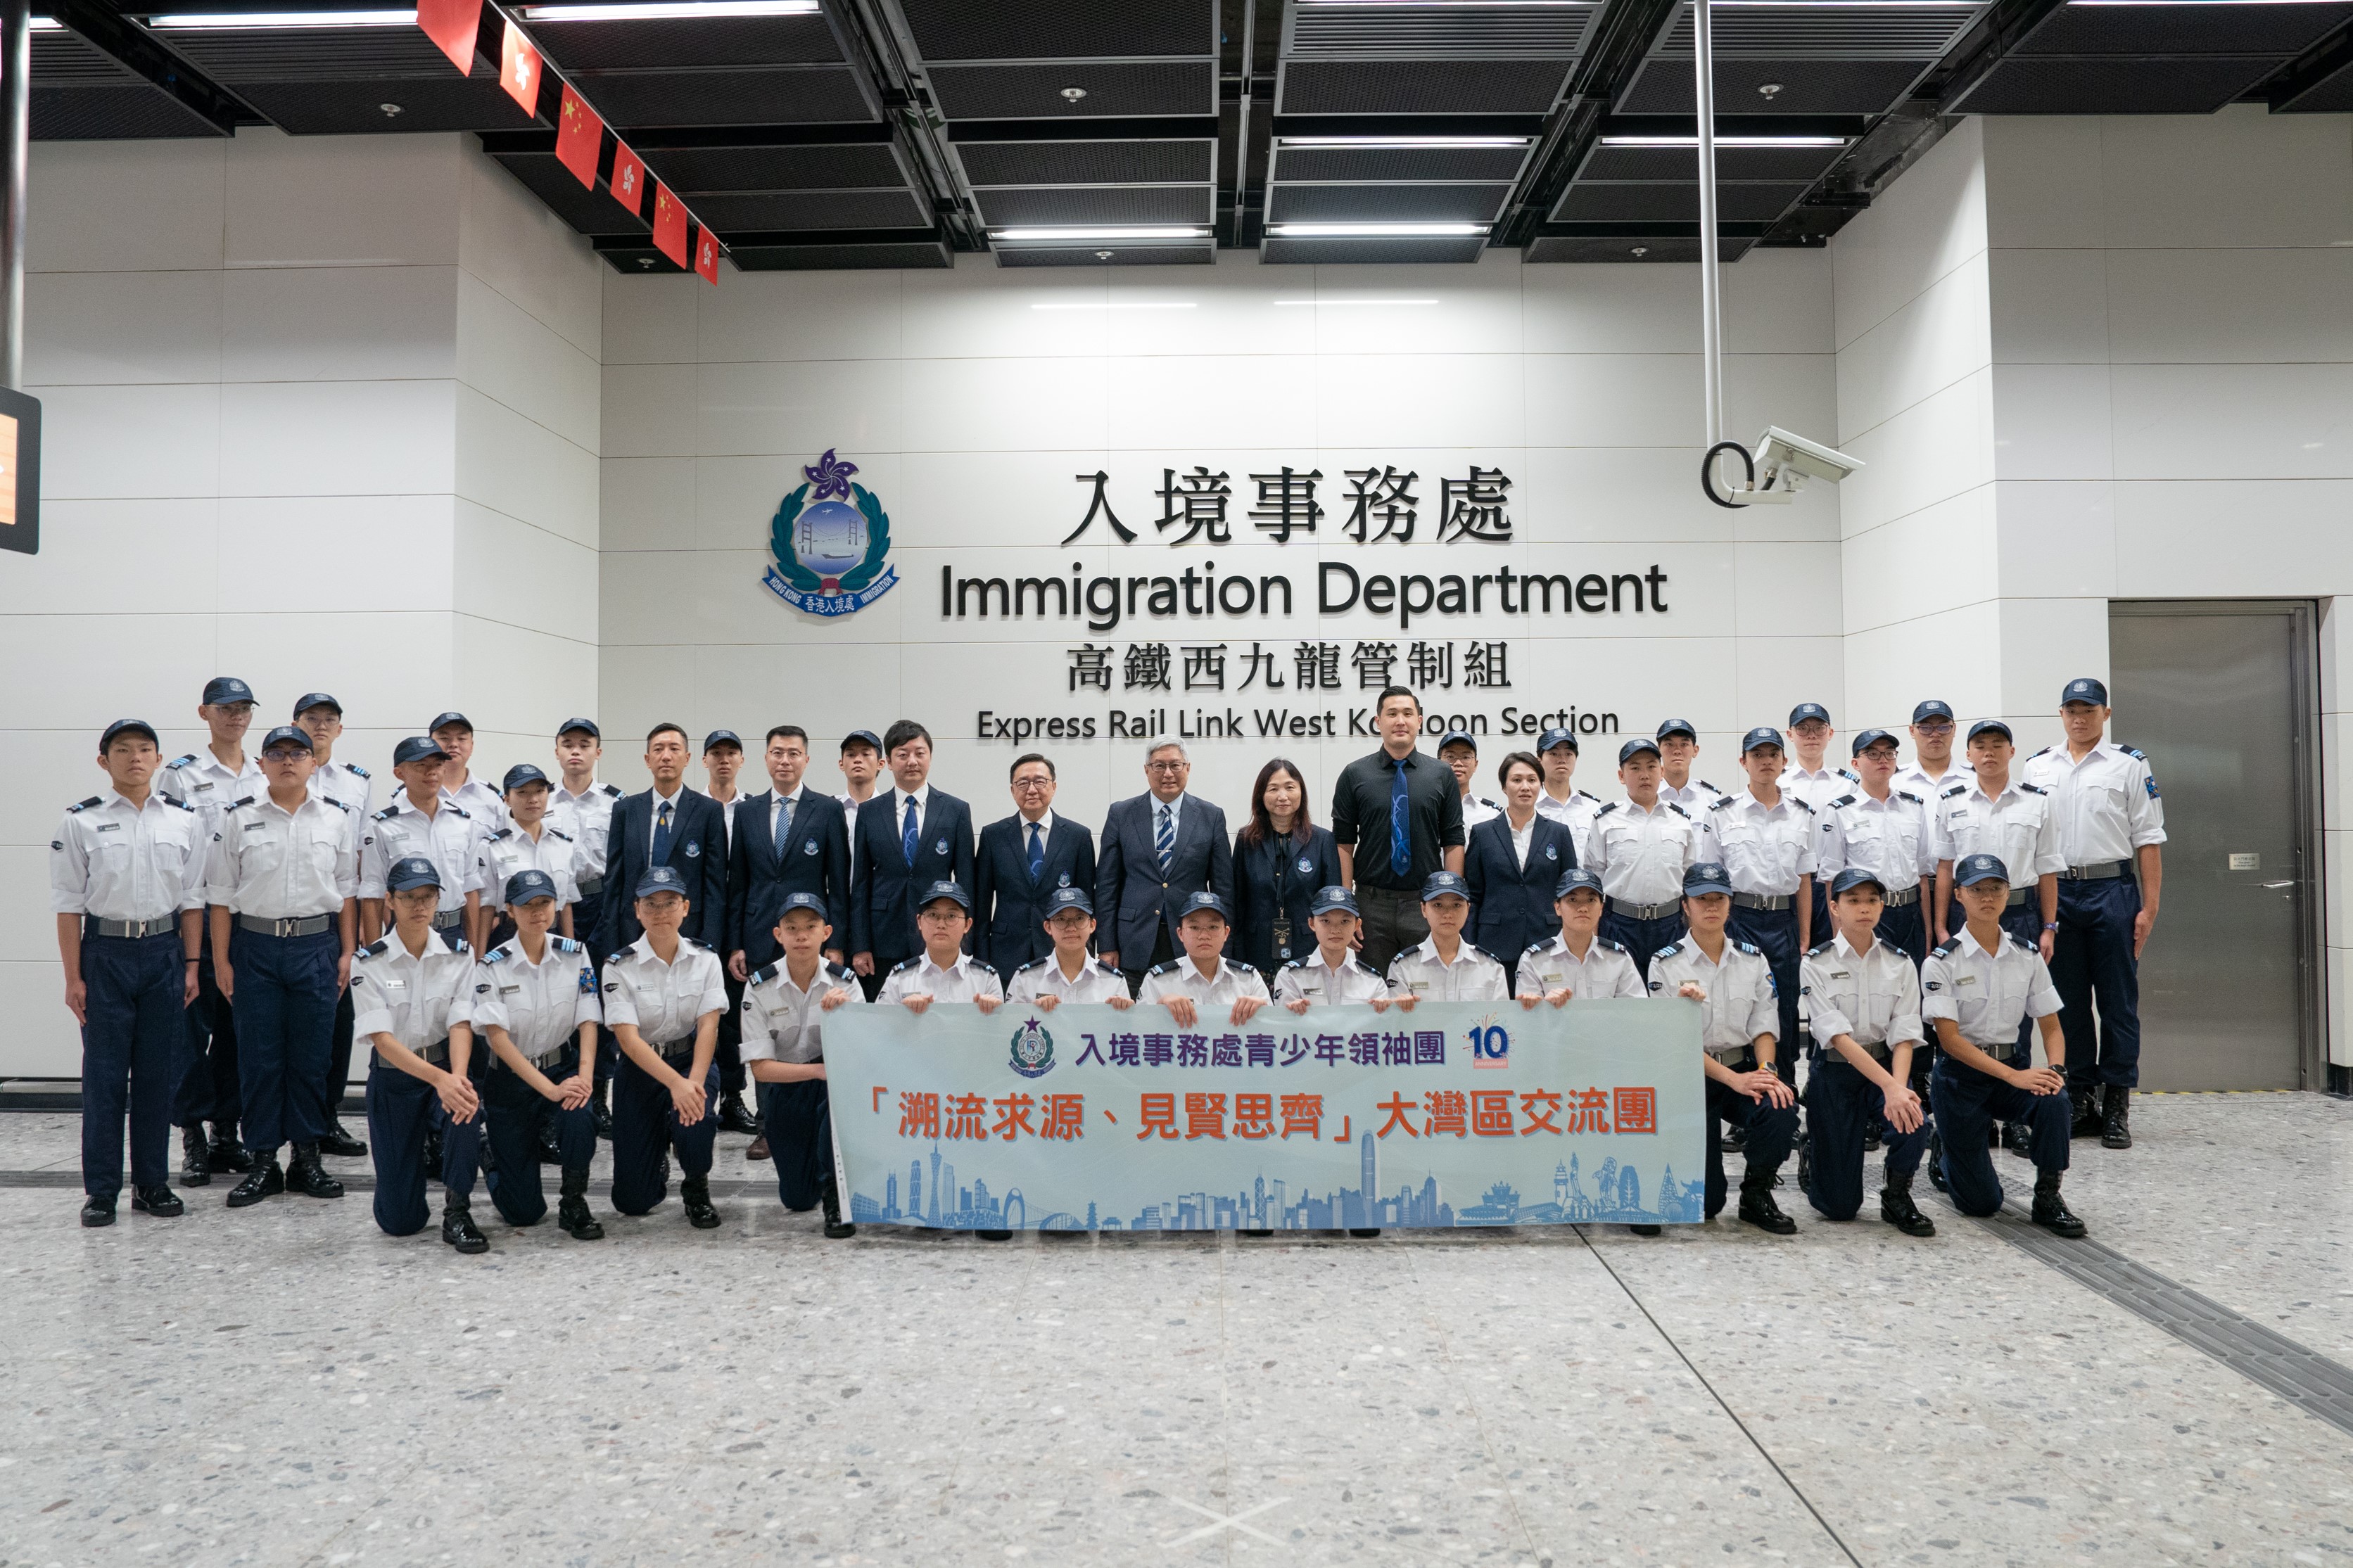 Photo shows 34 members of the IDYL, led by the Director of Immigration, Mr Au Ka-wang, (second row, eighth right), the Commissioner of the IDYL, Dr Cheng Kam-chung, (second row, eighth left), and three Deputy Commissioners of the IDYL, setting off the tour at the Express Rail Link West Kowloon station.